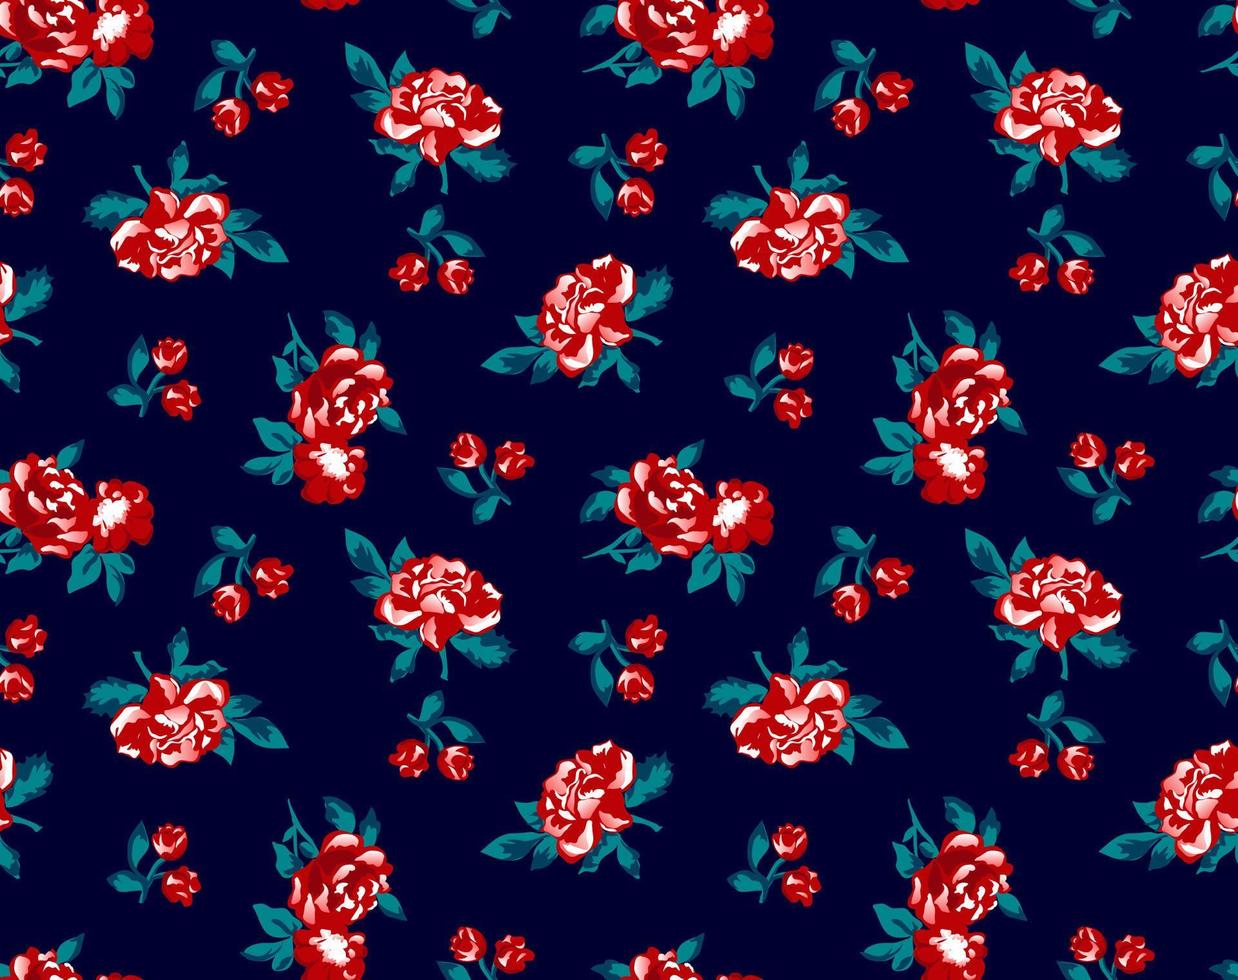 Floral liberty pattern. Plant background for fashion, tapestries, prints. Modern floral design perfect for fashion and decoration vector